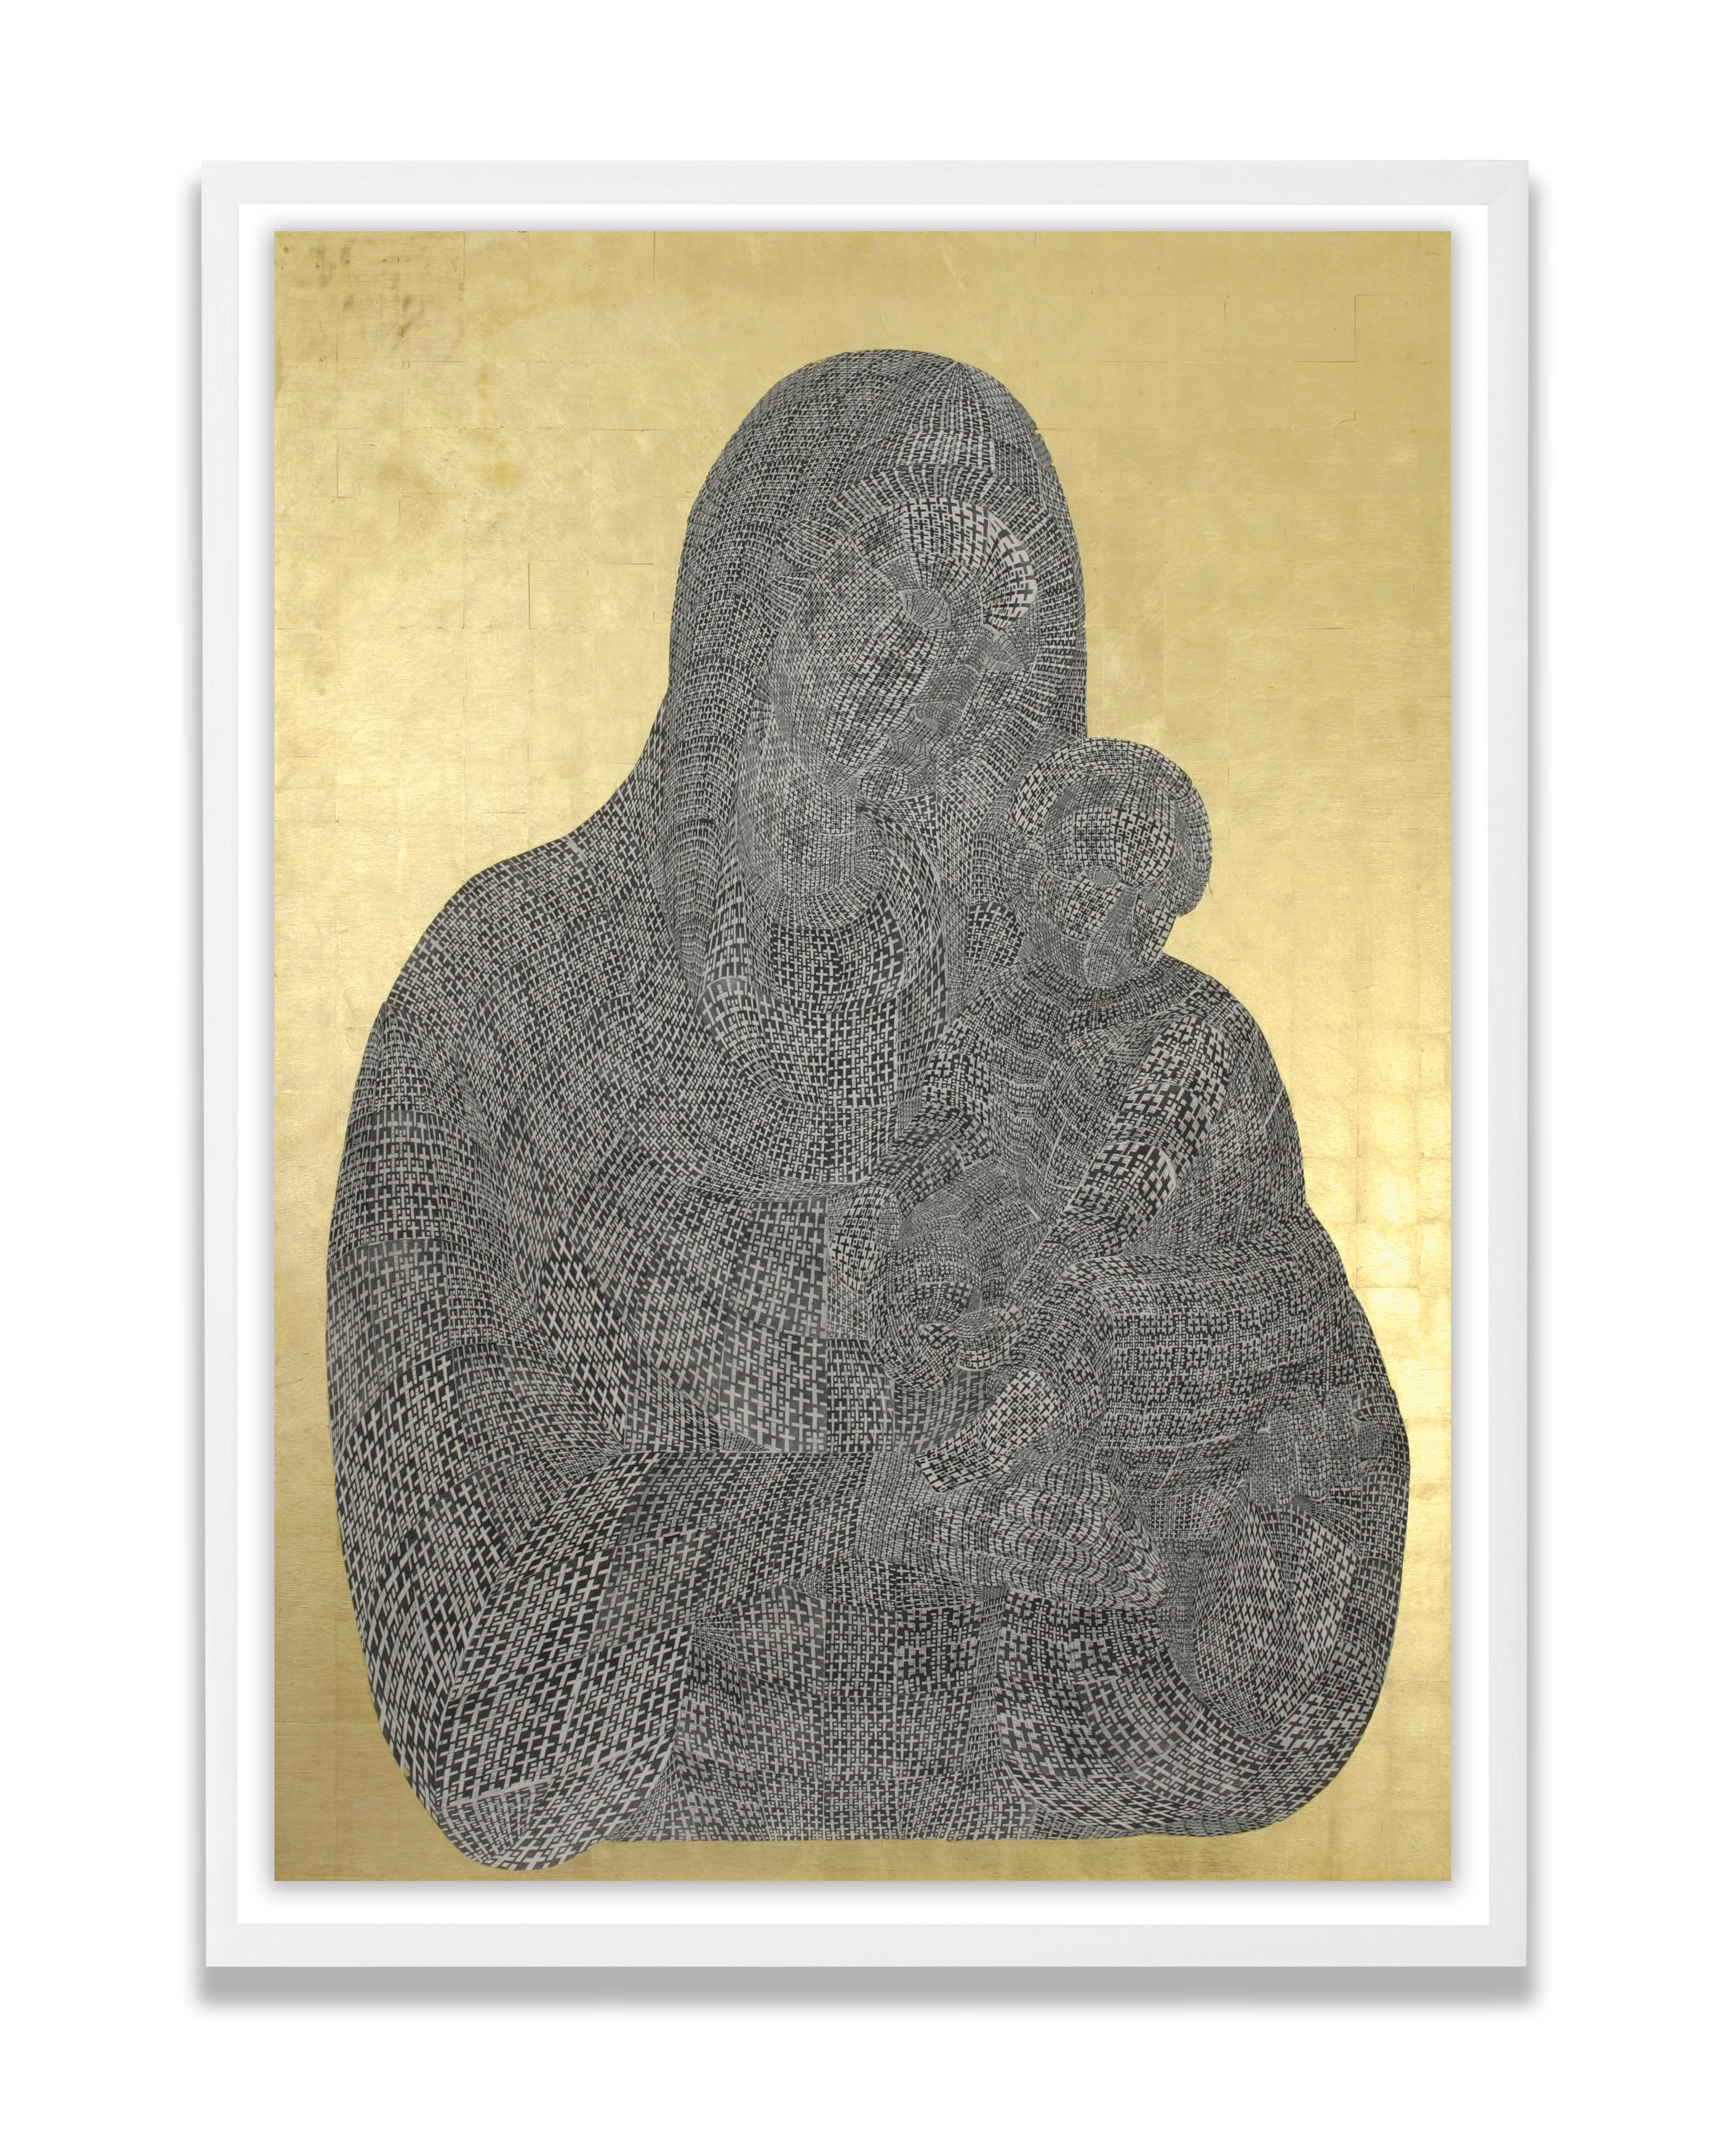 Thomas Bayrle, Madonna d’oro [Golden Madonna], 1988. Photocopy collage and gold leaf on wo